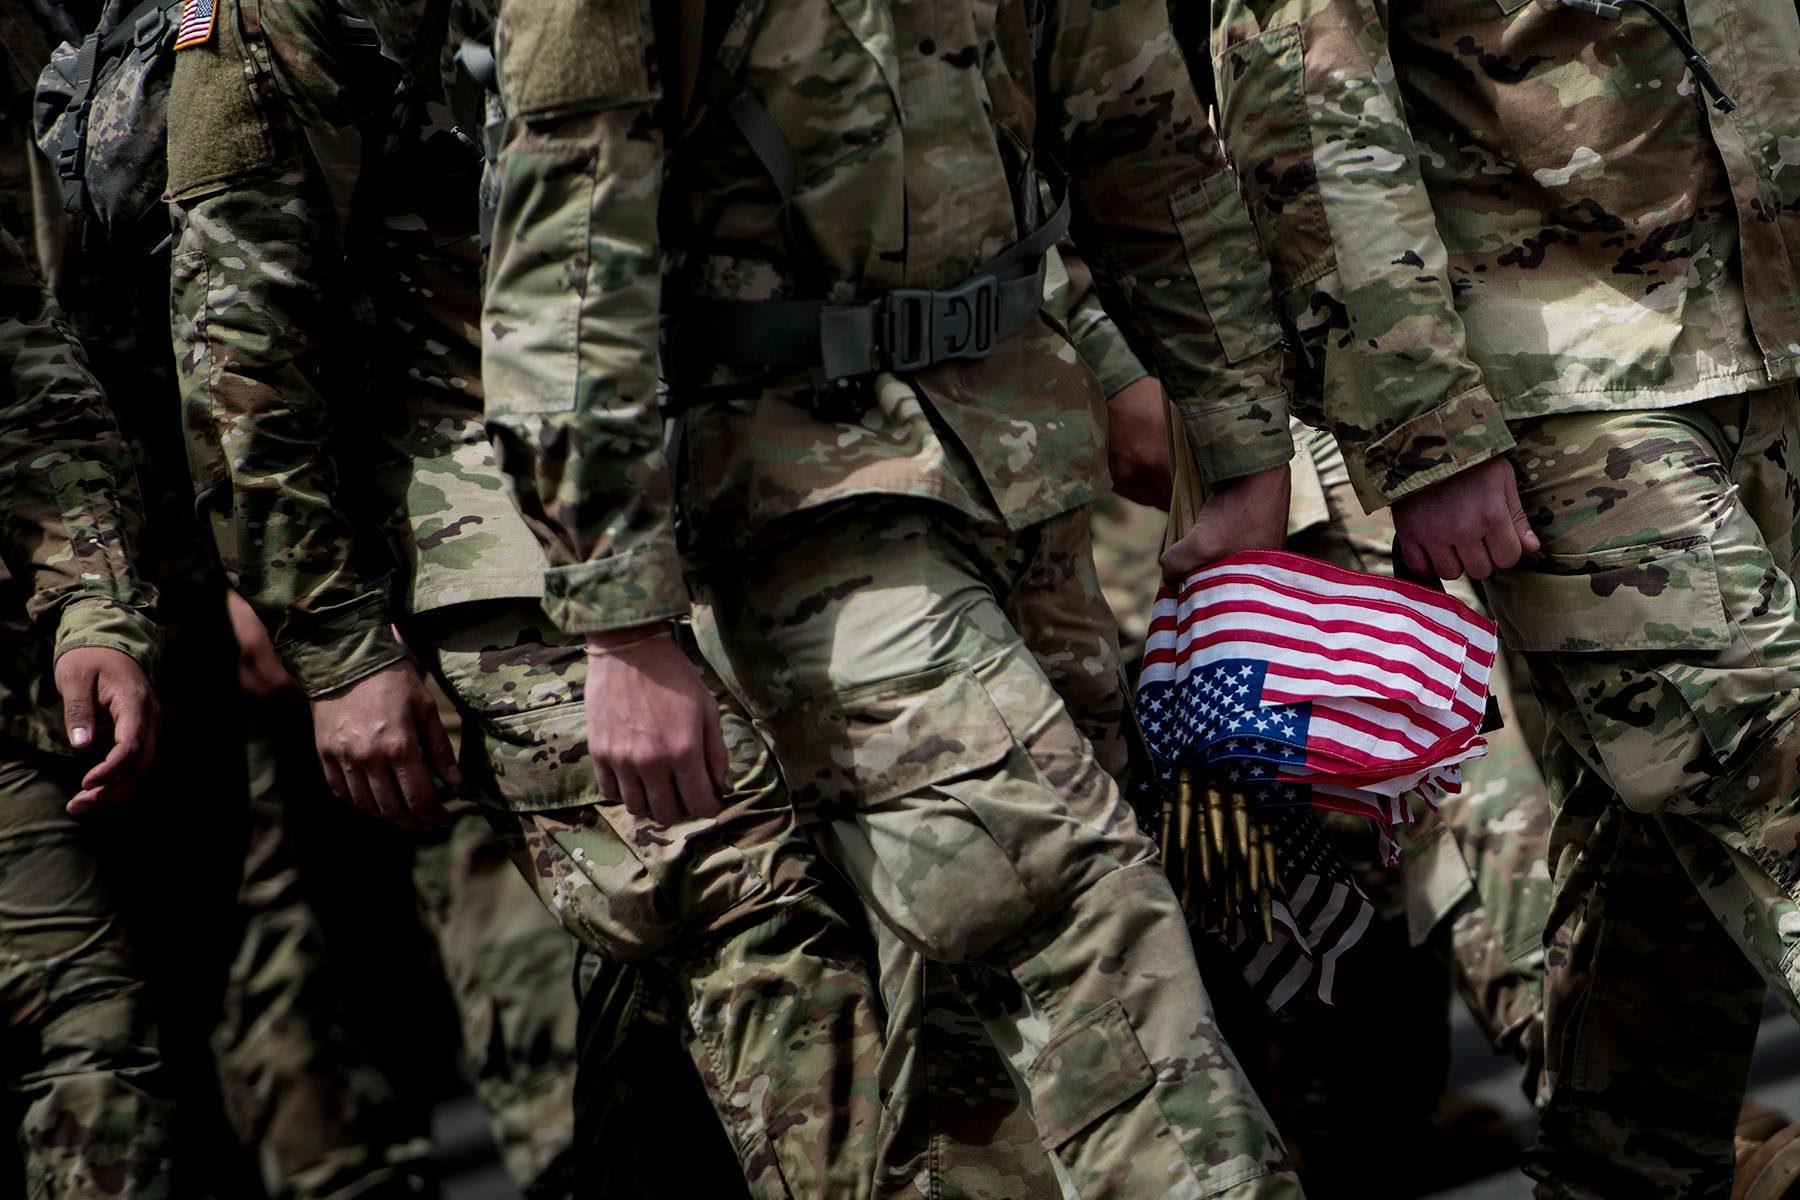 Soldiers holding american flag walk together in a tight group.